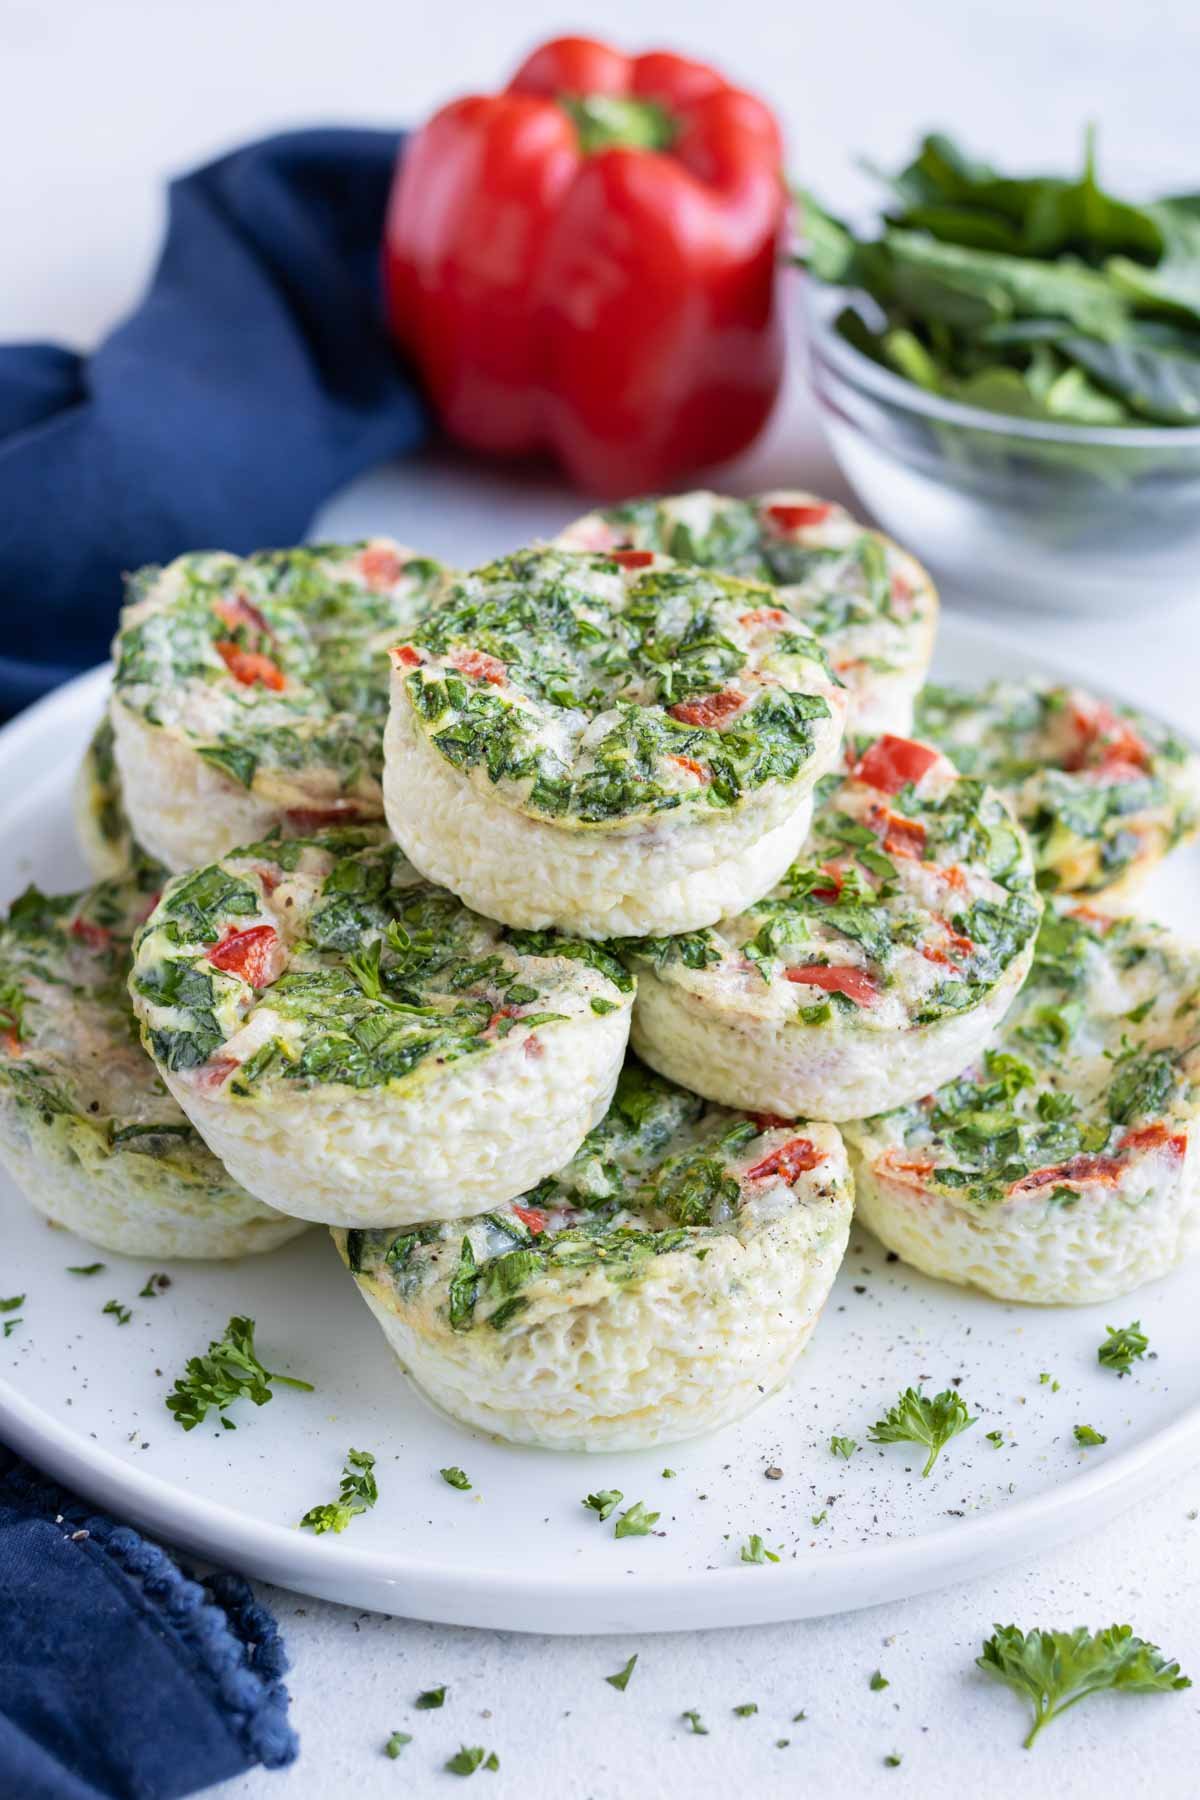 Healthy egg white bites are topped with fresh parsley before eating.